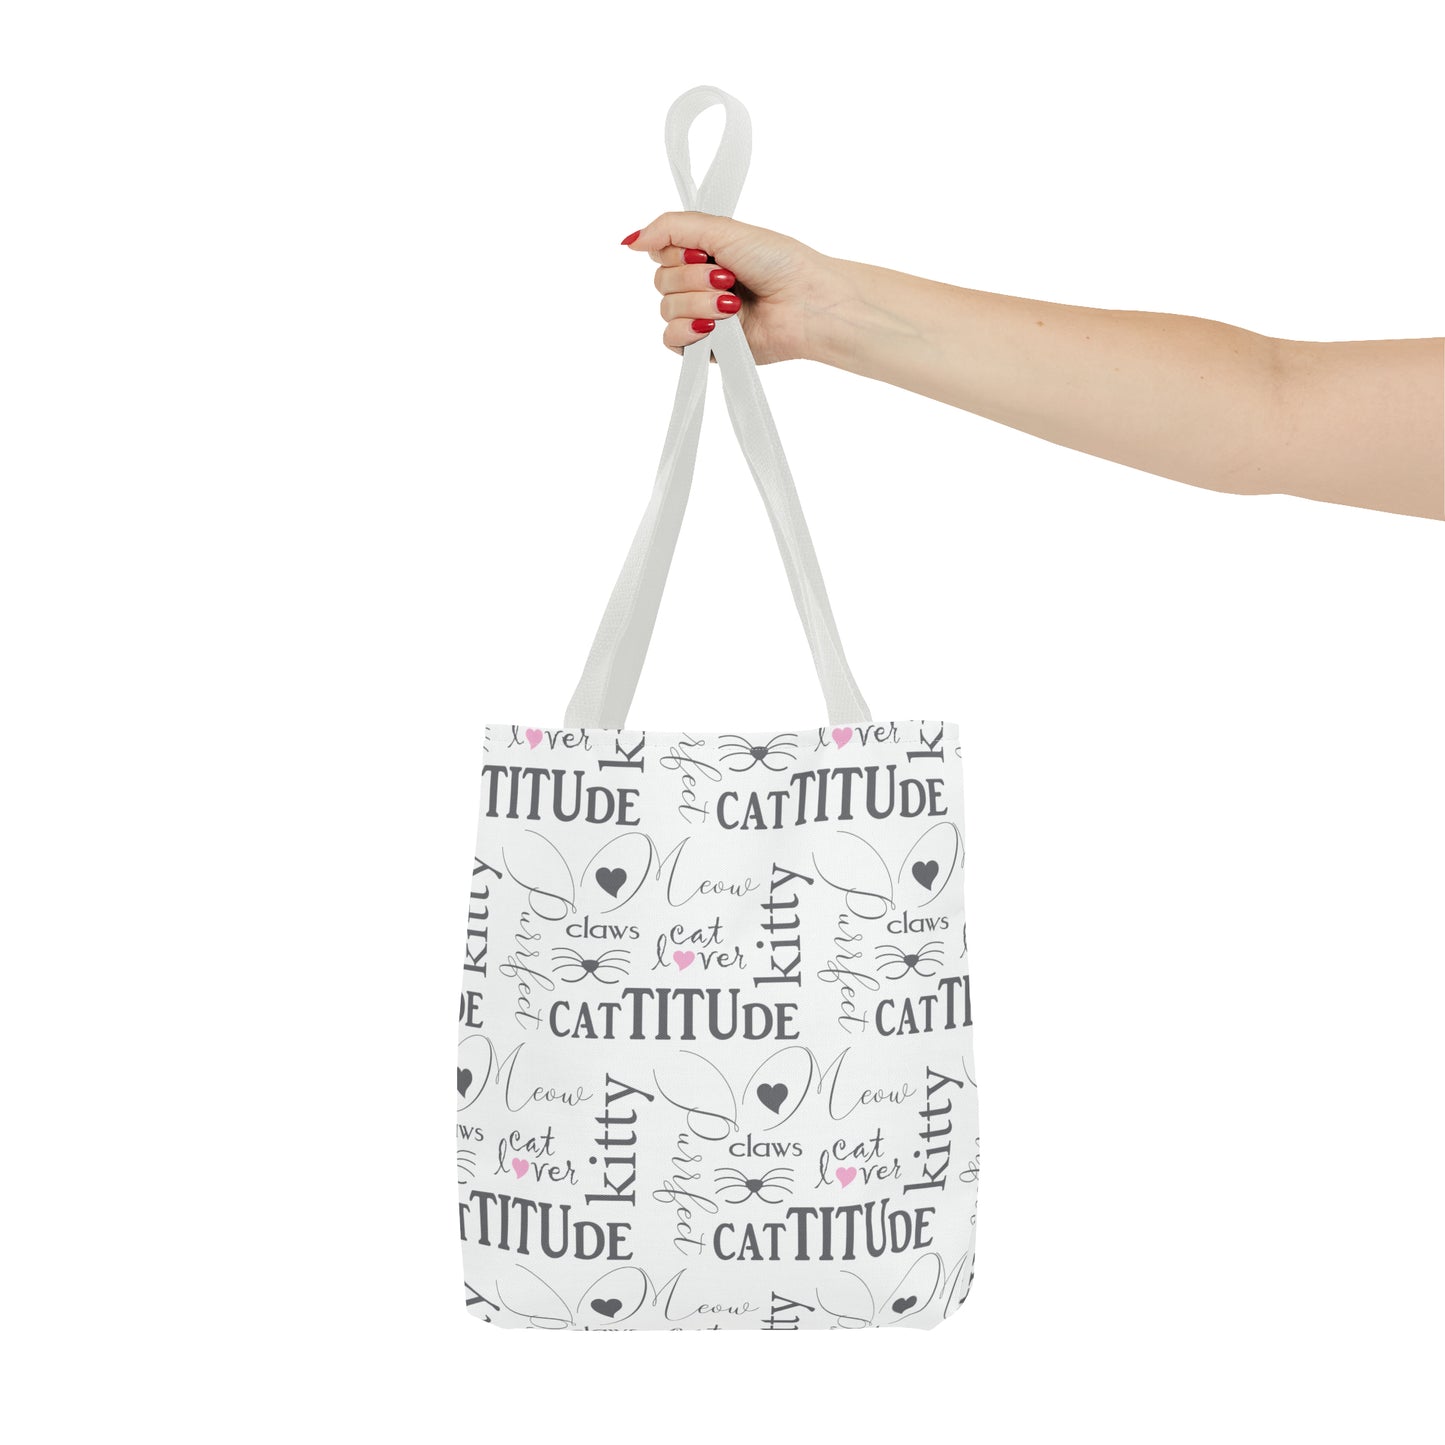 Strut Your Catitude: The 'Catitude Central' Tote Bag for the Bold Cat Lover #225